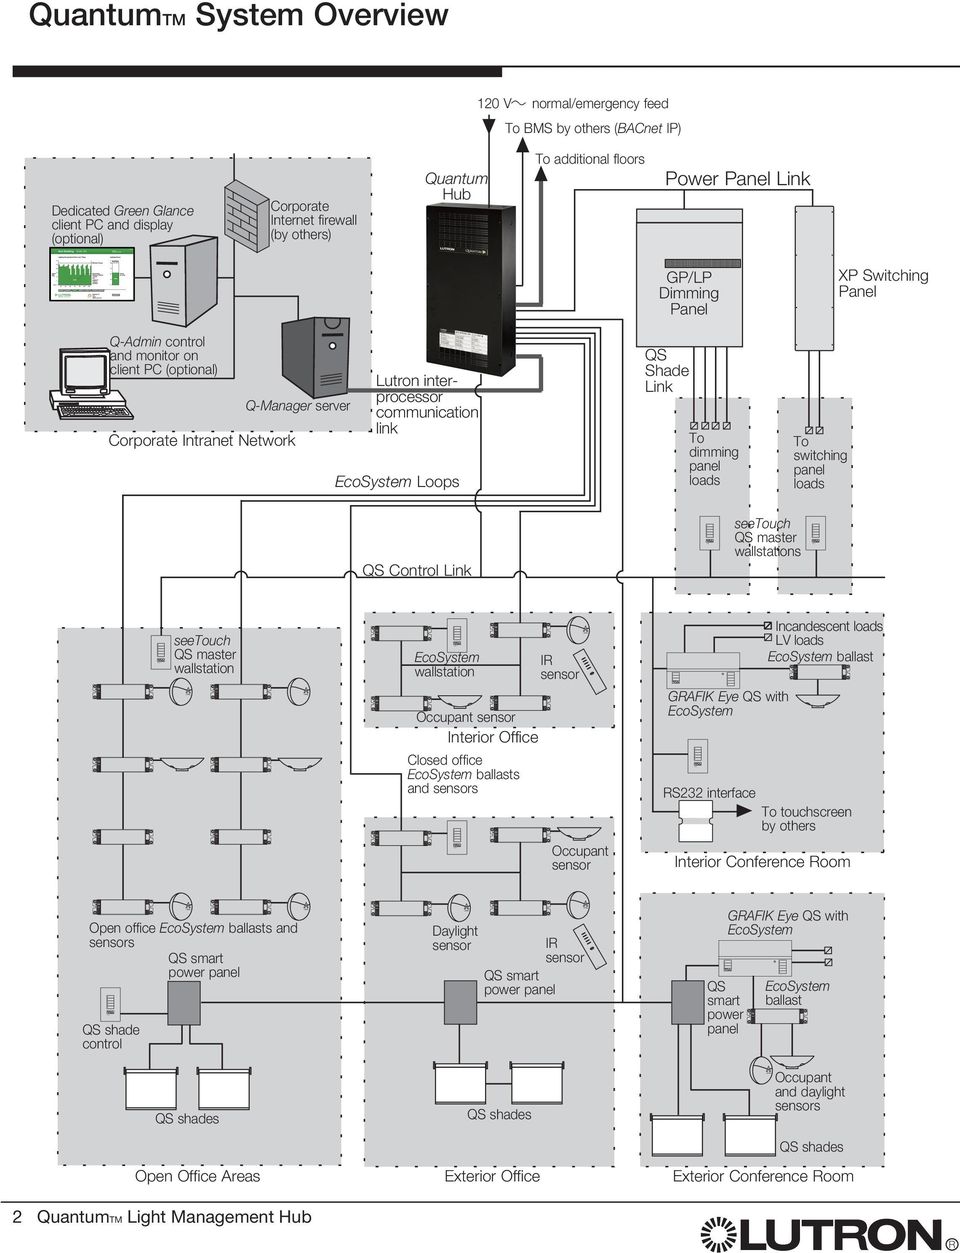 (optional) Corporate Intranet Network Q-Manager server Lutron interprocessor communication link Loops GP/LP Dimming Panel QS Shade Link To dimming panel loads To switching panel loads XP Switching